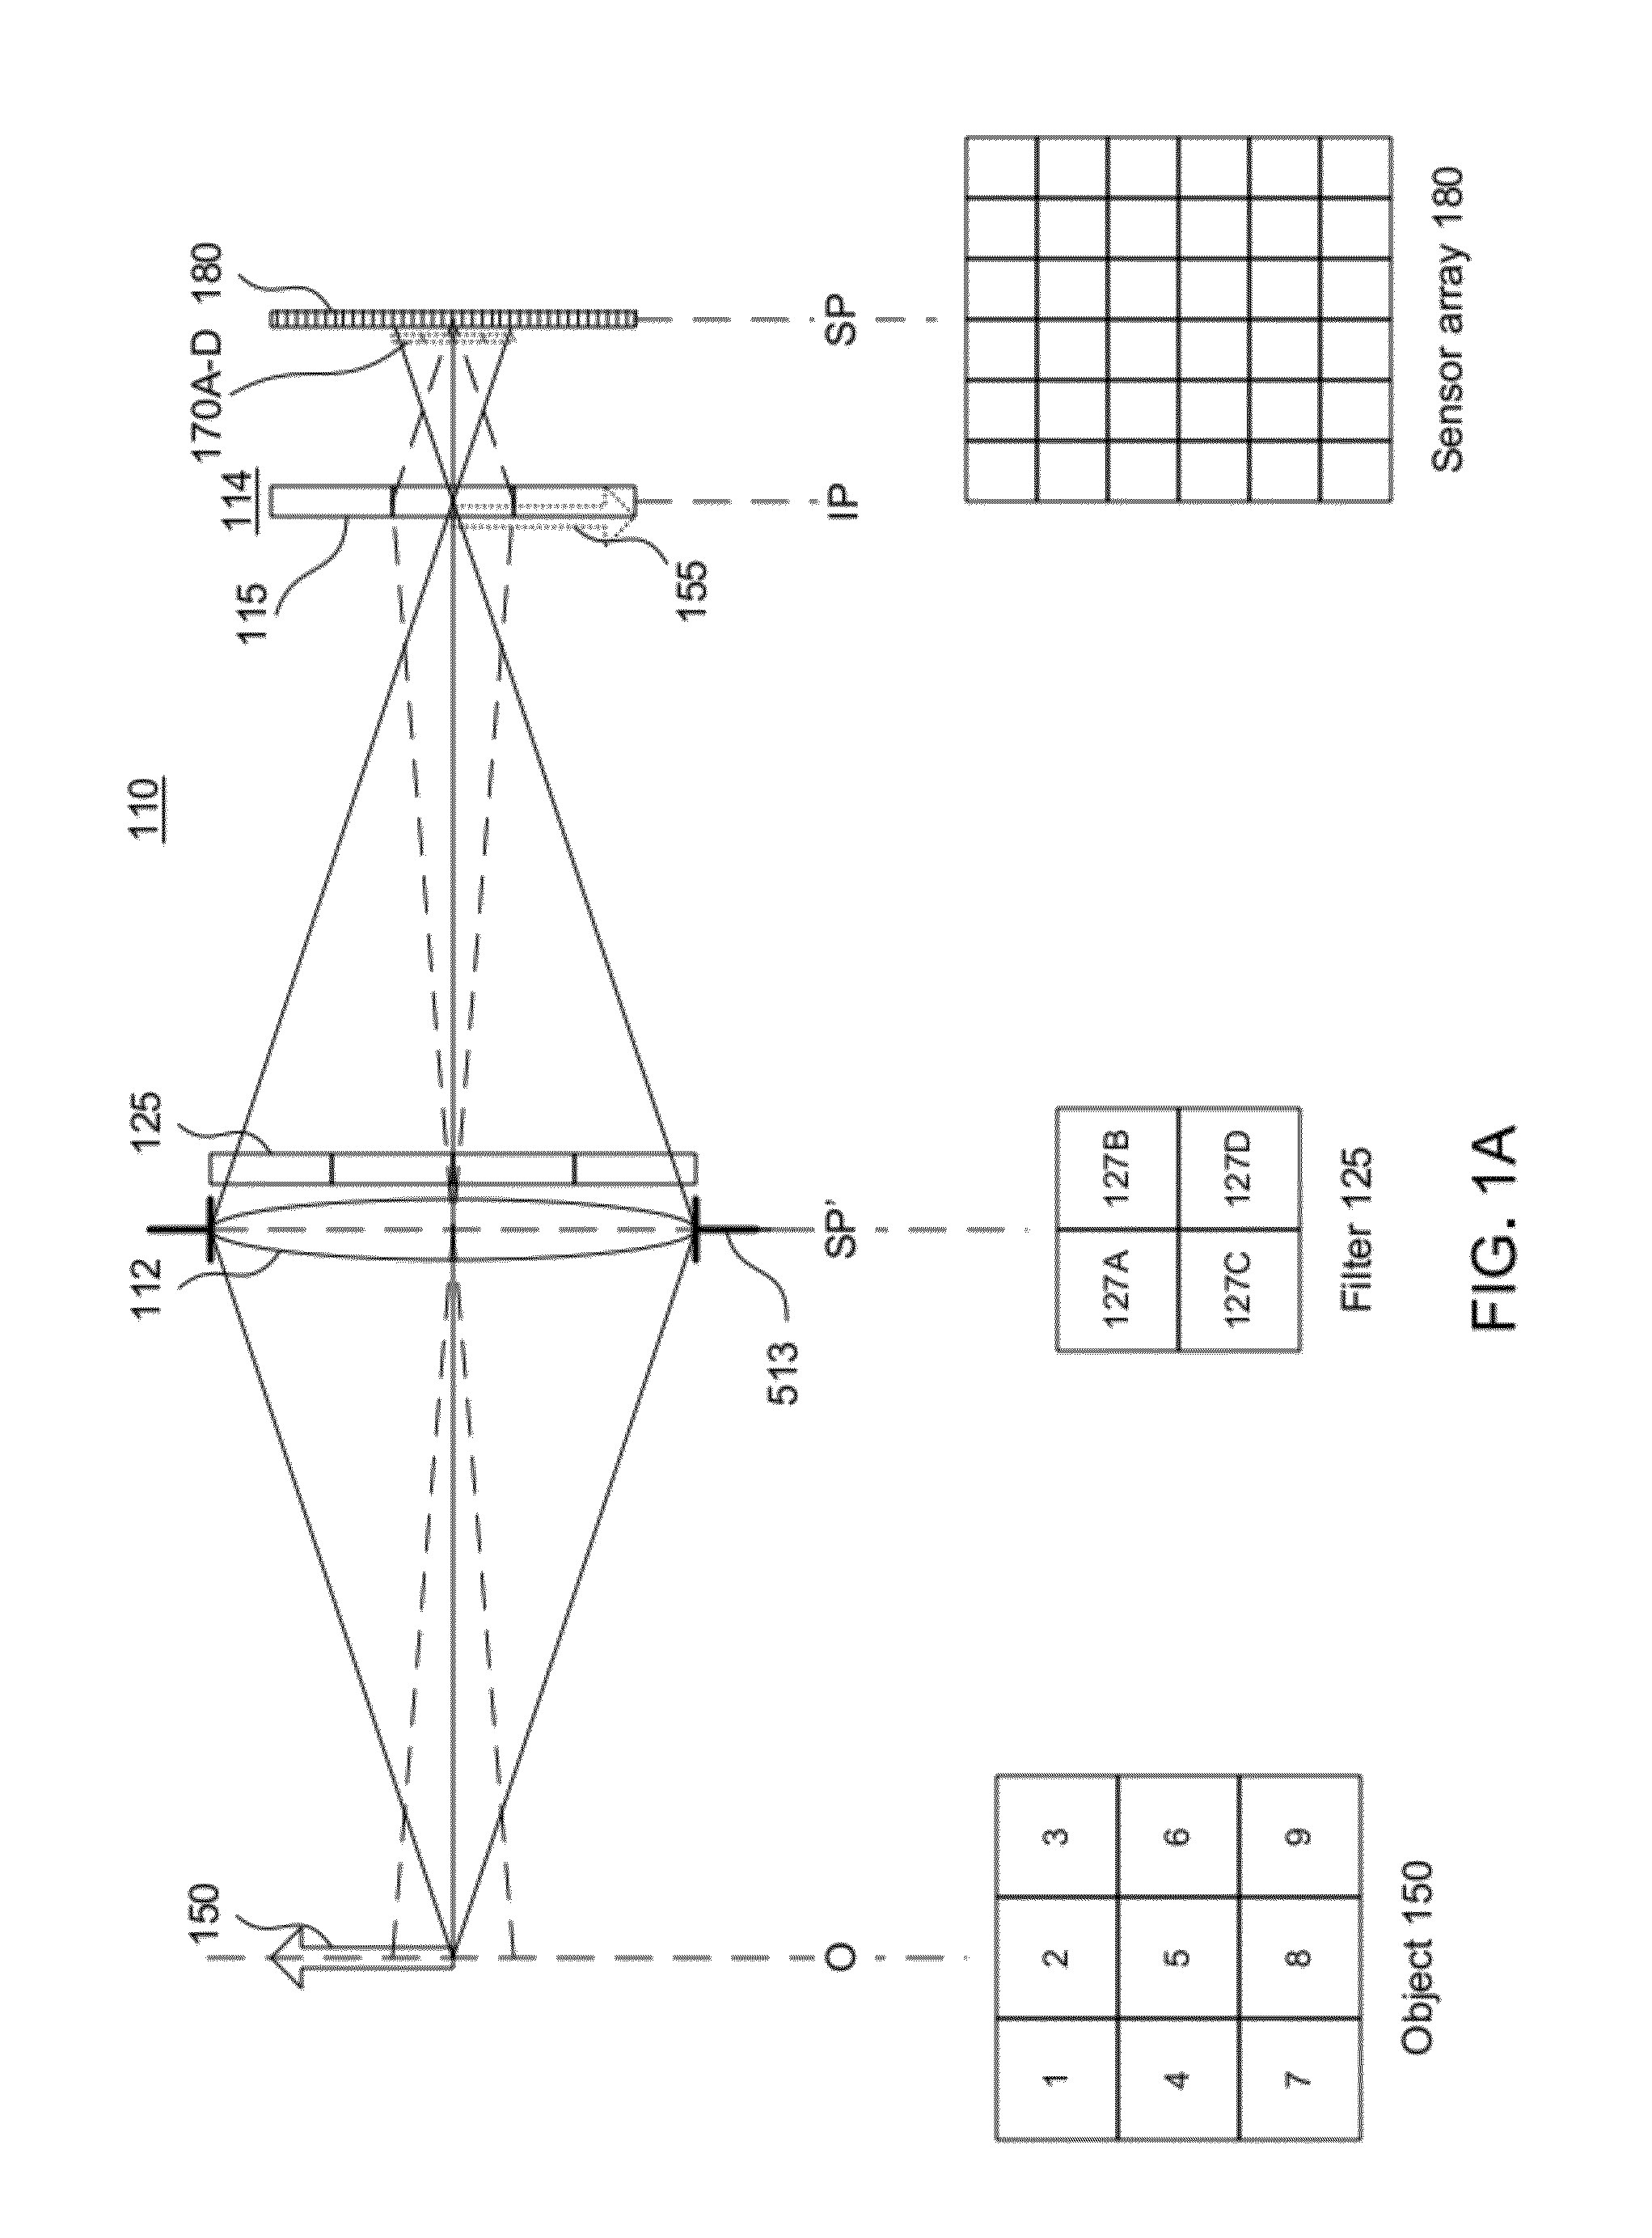 Design of Filter Modules for Aperture-coded, Multiplexed Imaging Systems